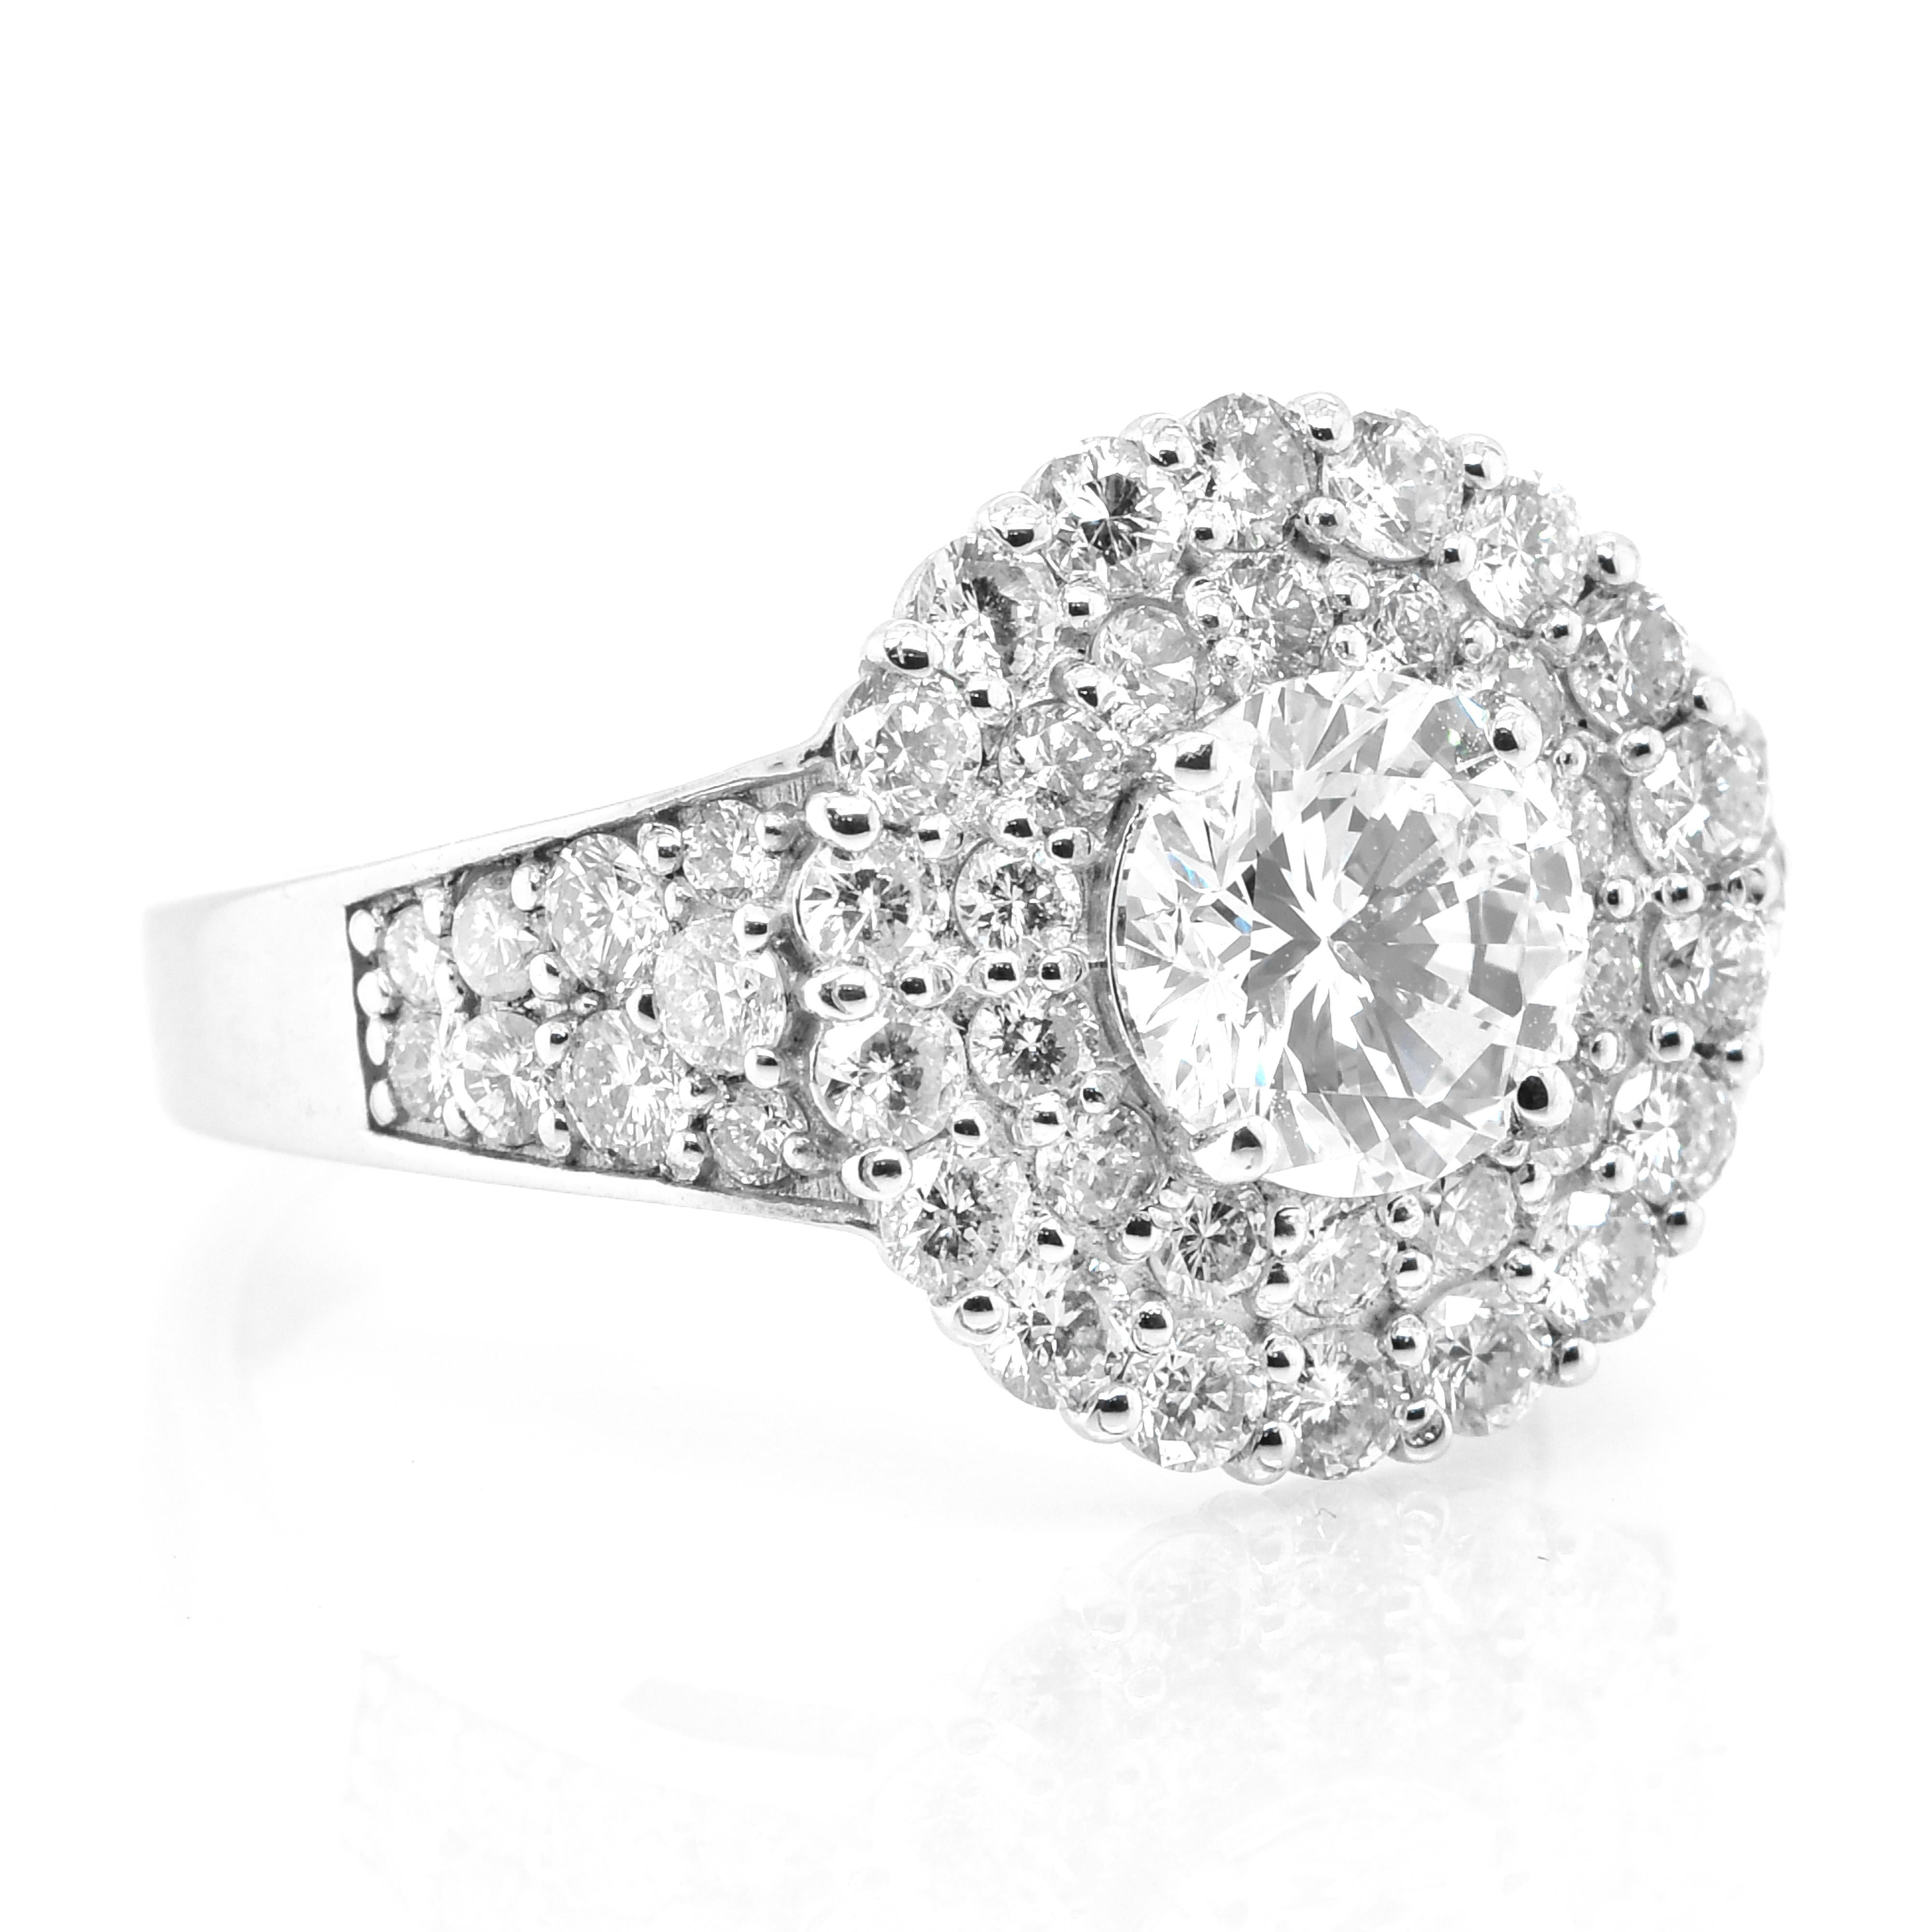 Modern 1.06 Carat, H Si-2, Earth-Mined Diamond Cocktail Ring made in Platinum For Sale